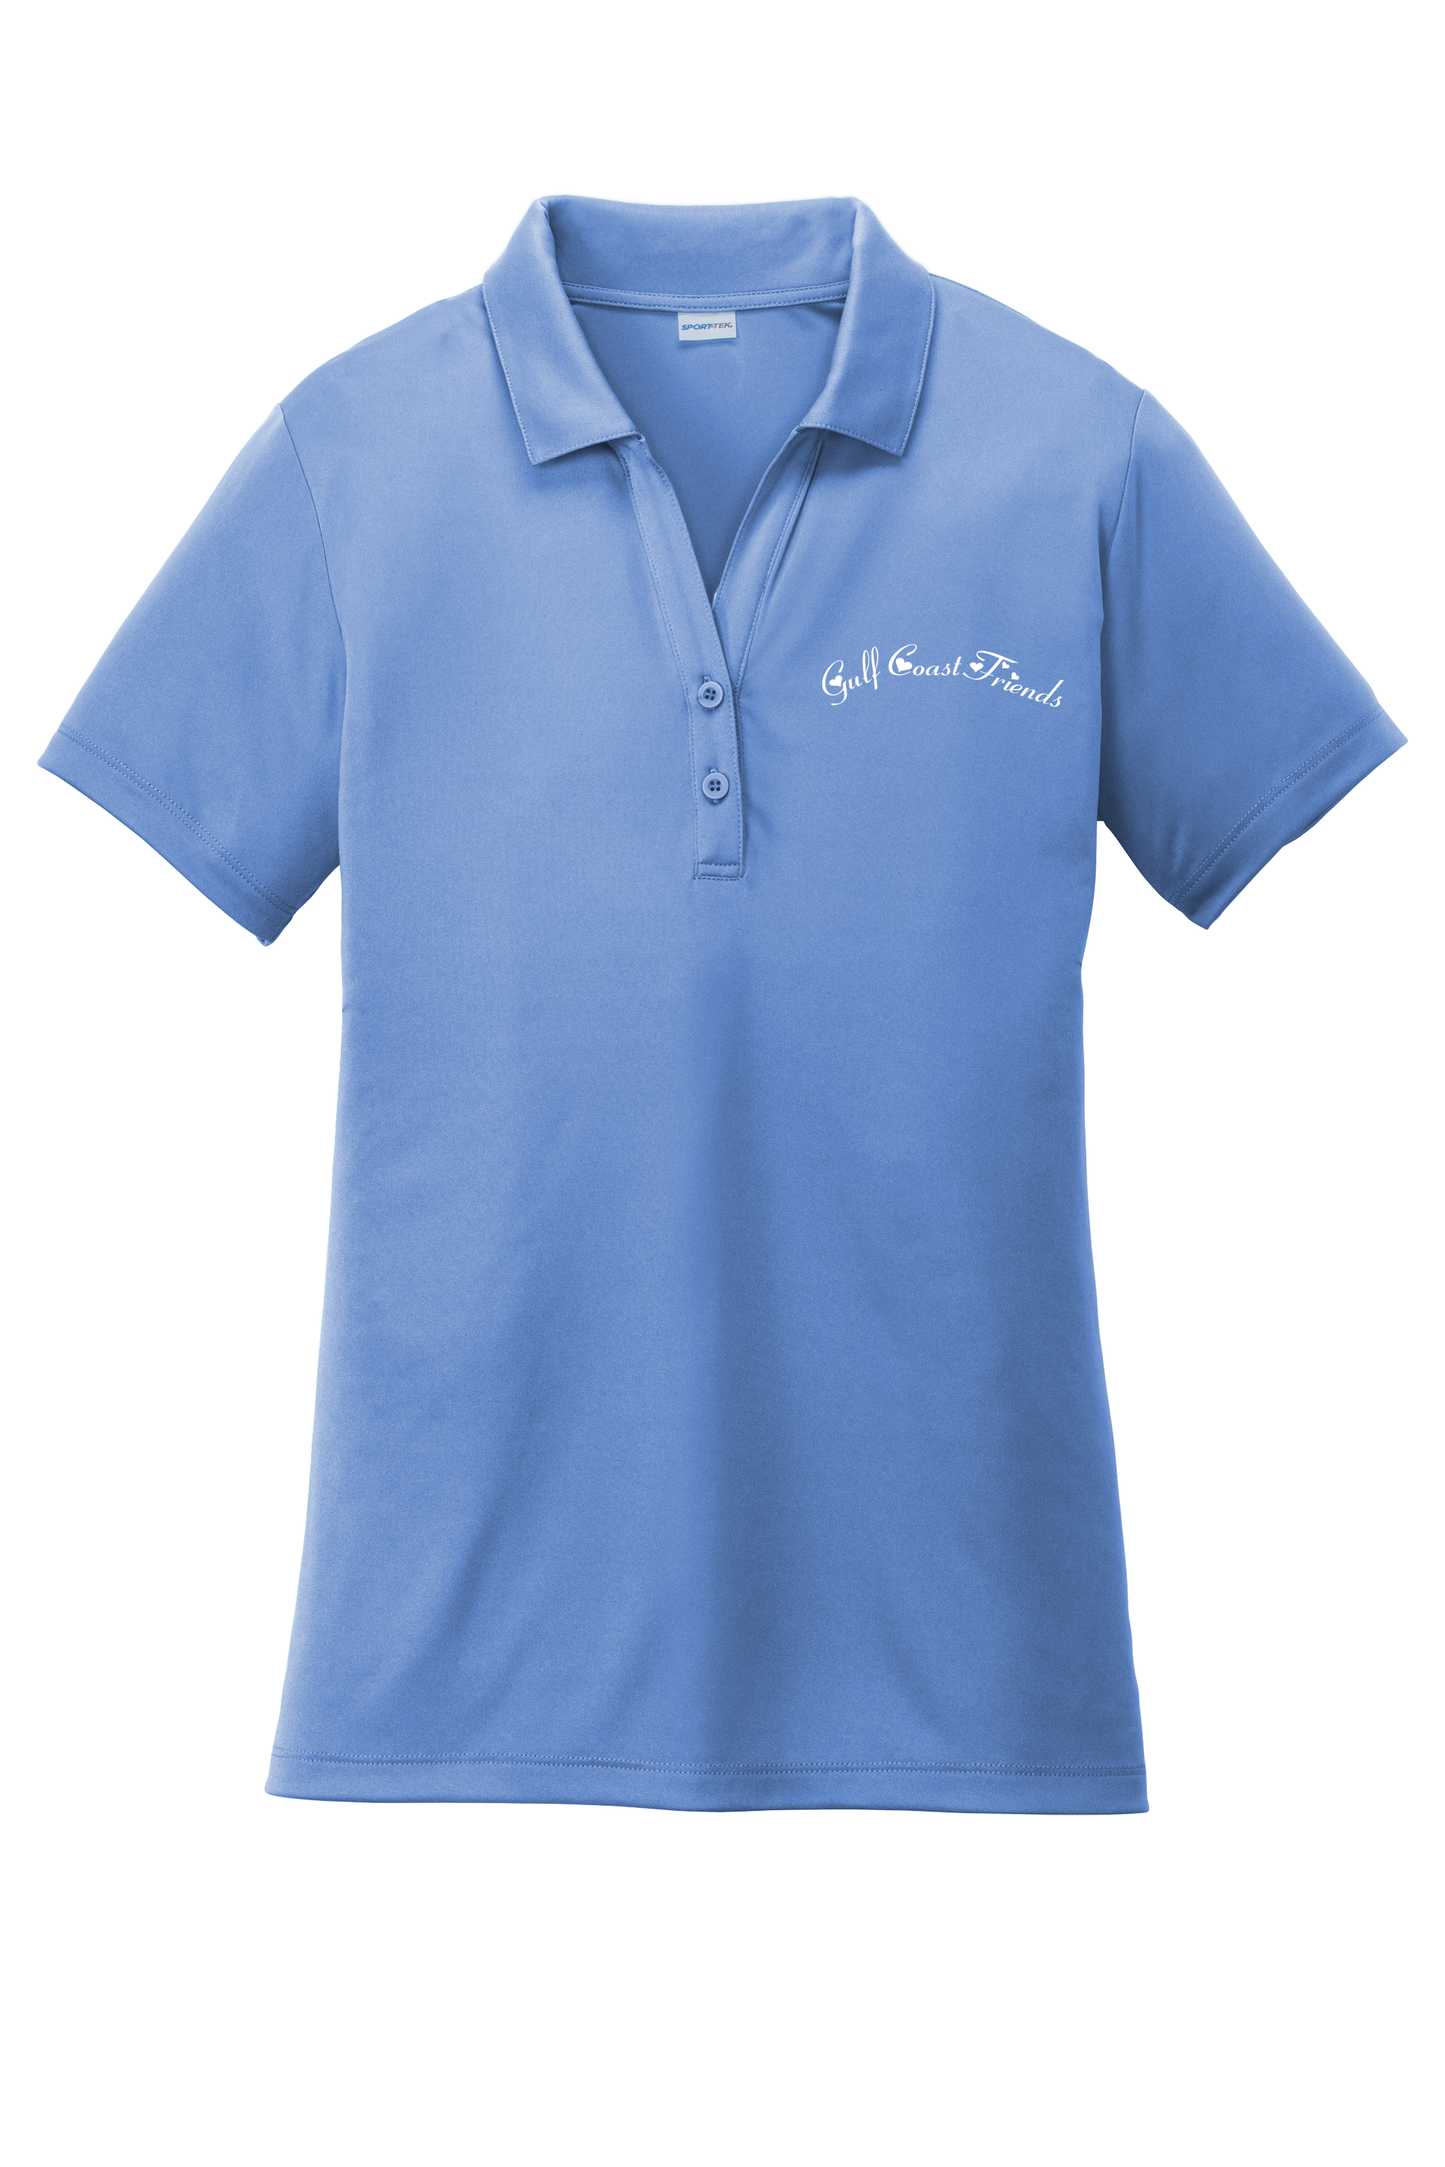 Gulf Coast Friends Short Sleeve Embroidered Polo